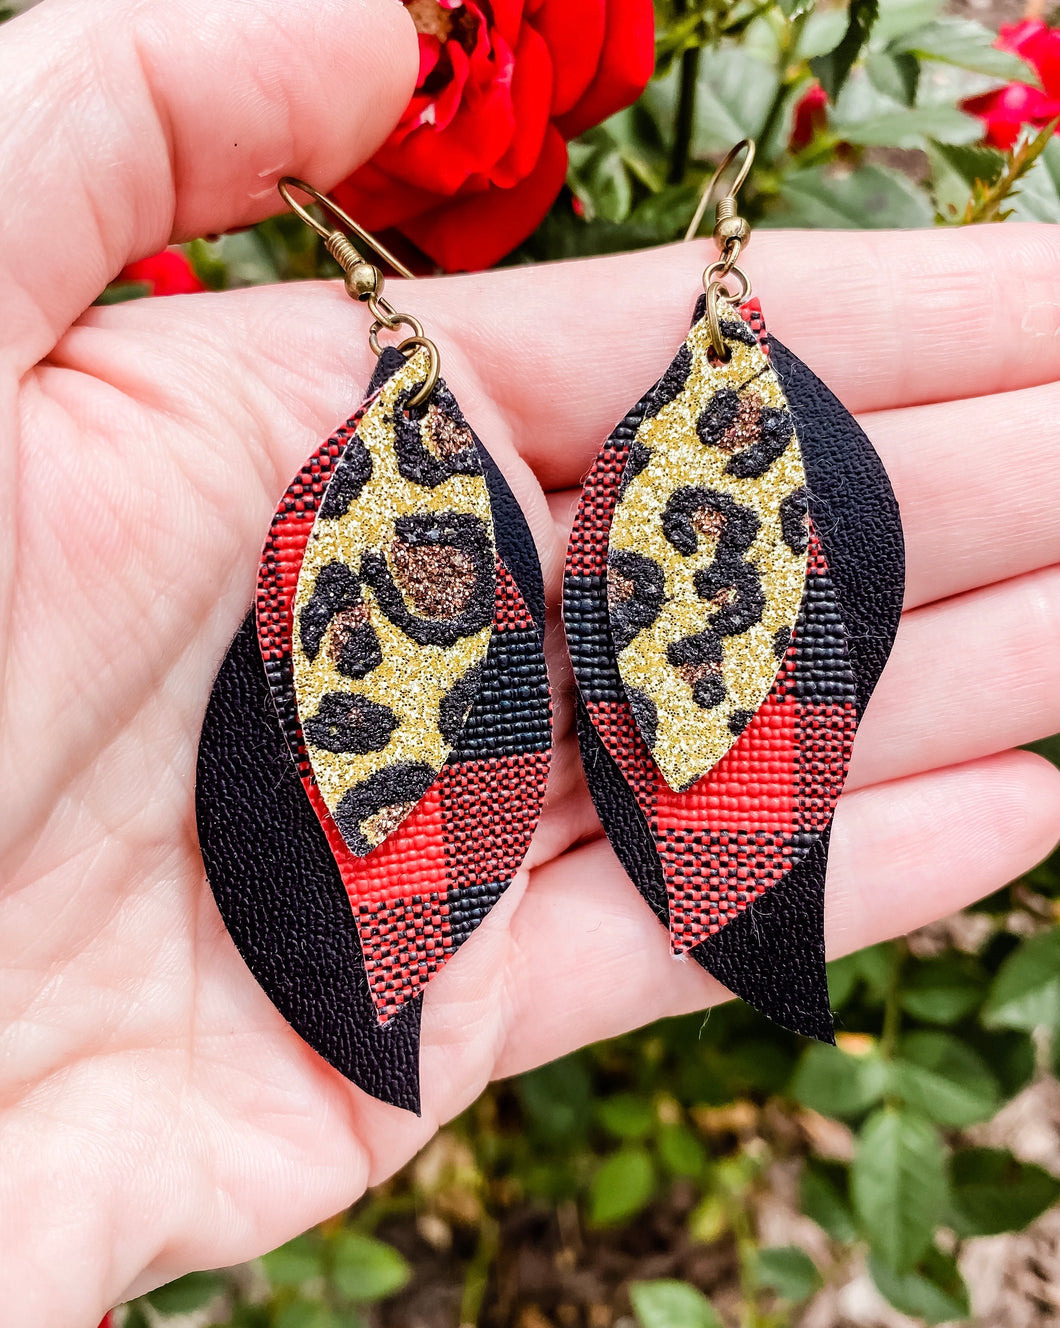 How To Make Faux Leather Earrings with Cricut Joy - Tastefully Frugal